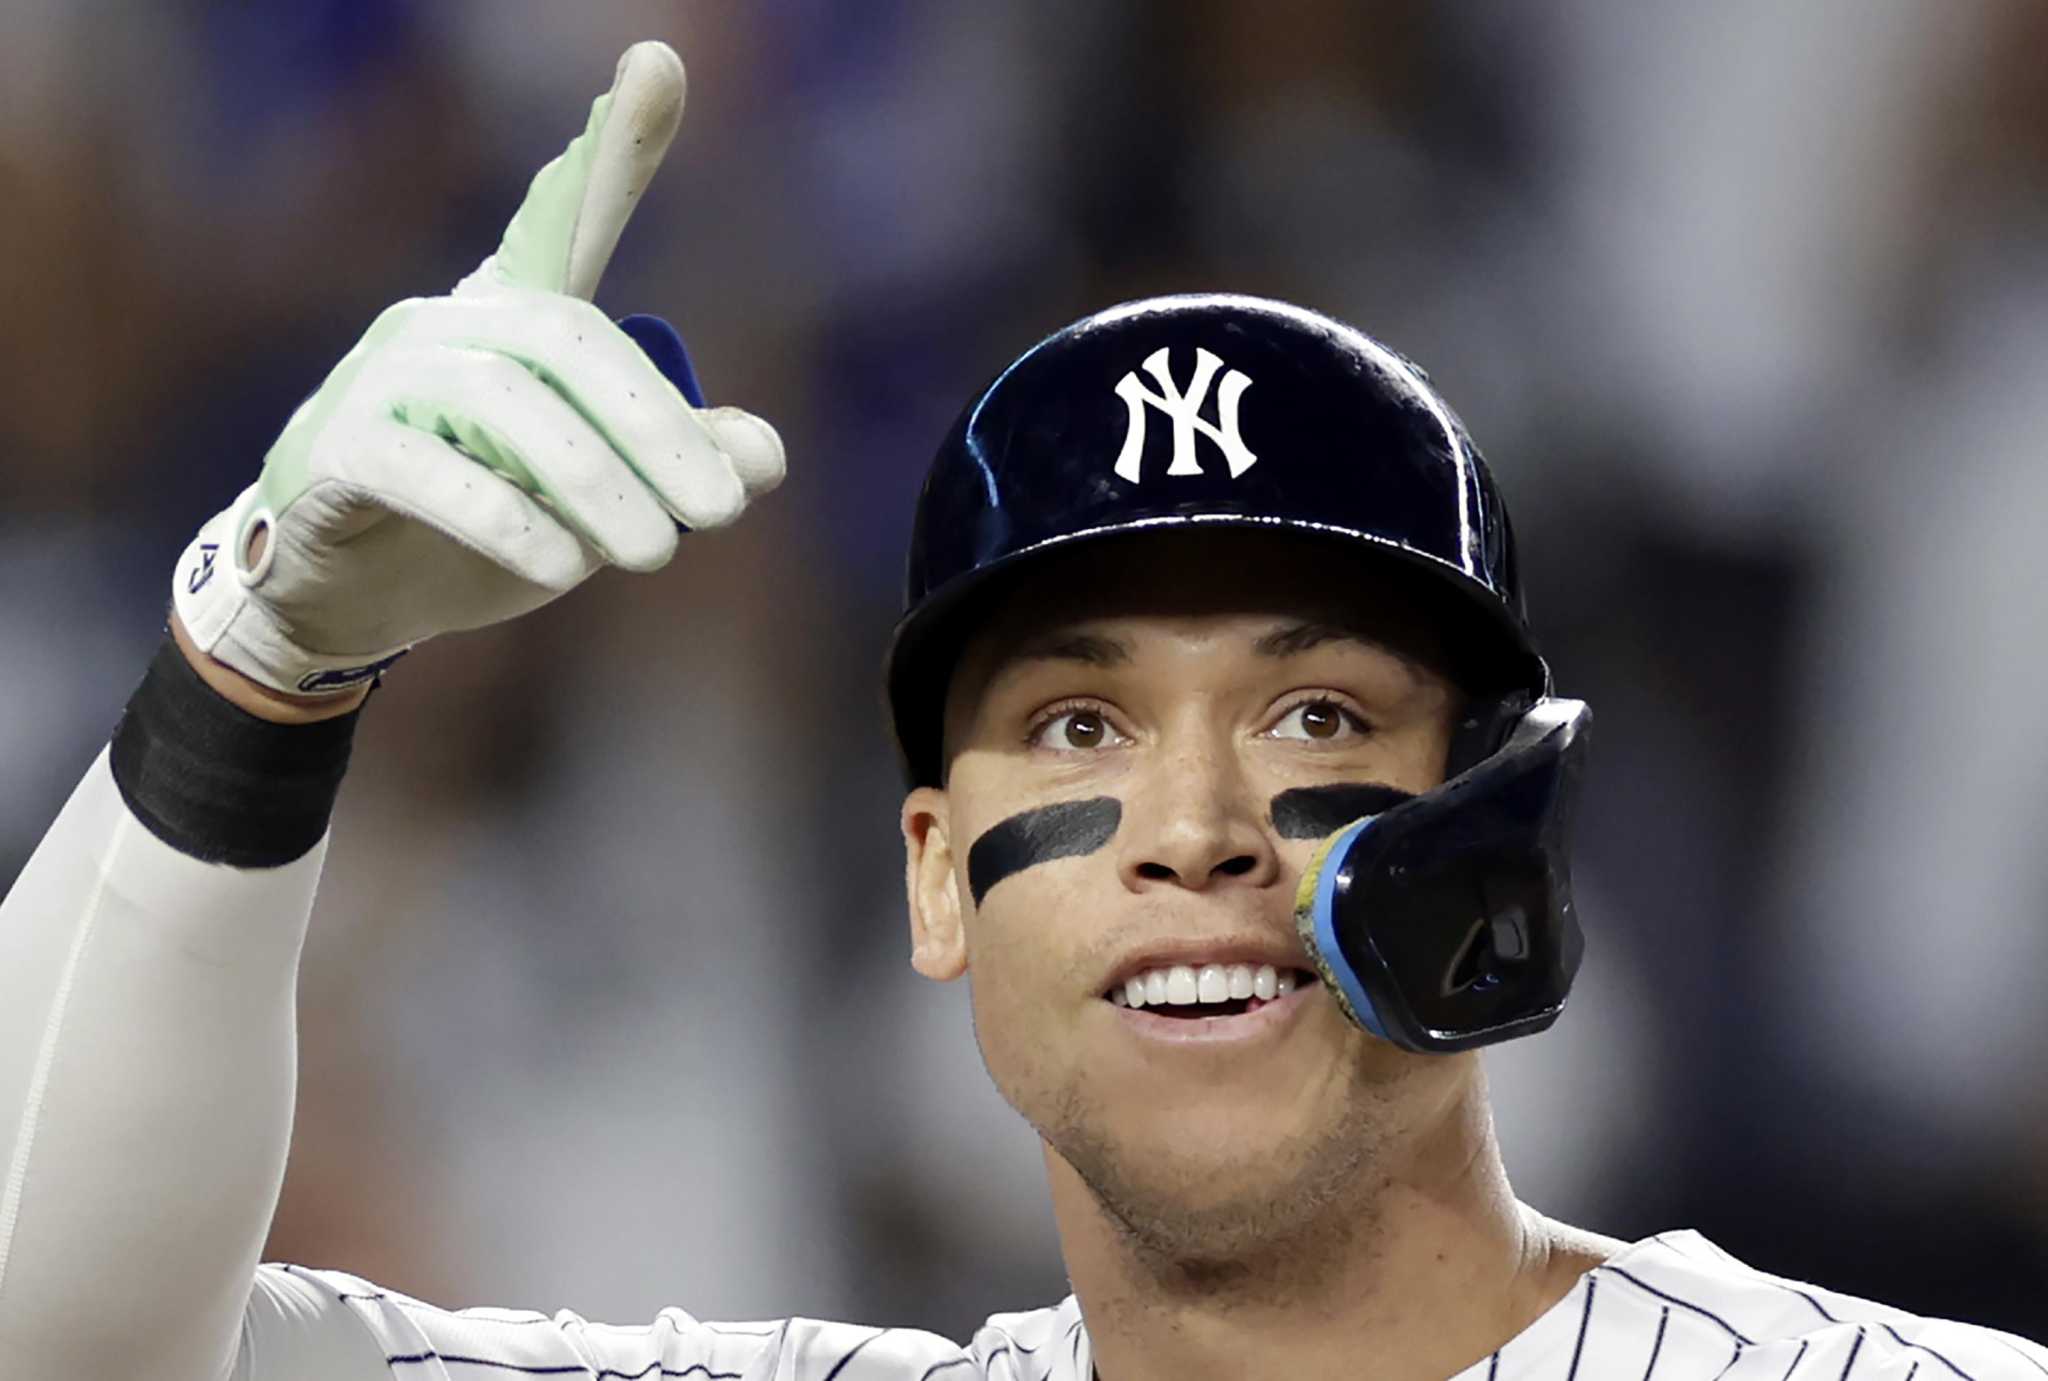 Aaron Judge's bid to win a Triple Crown something special for MLB history